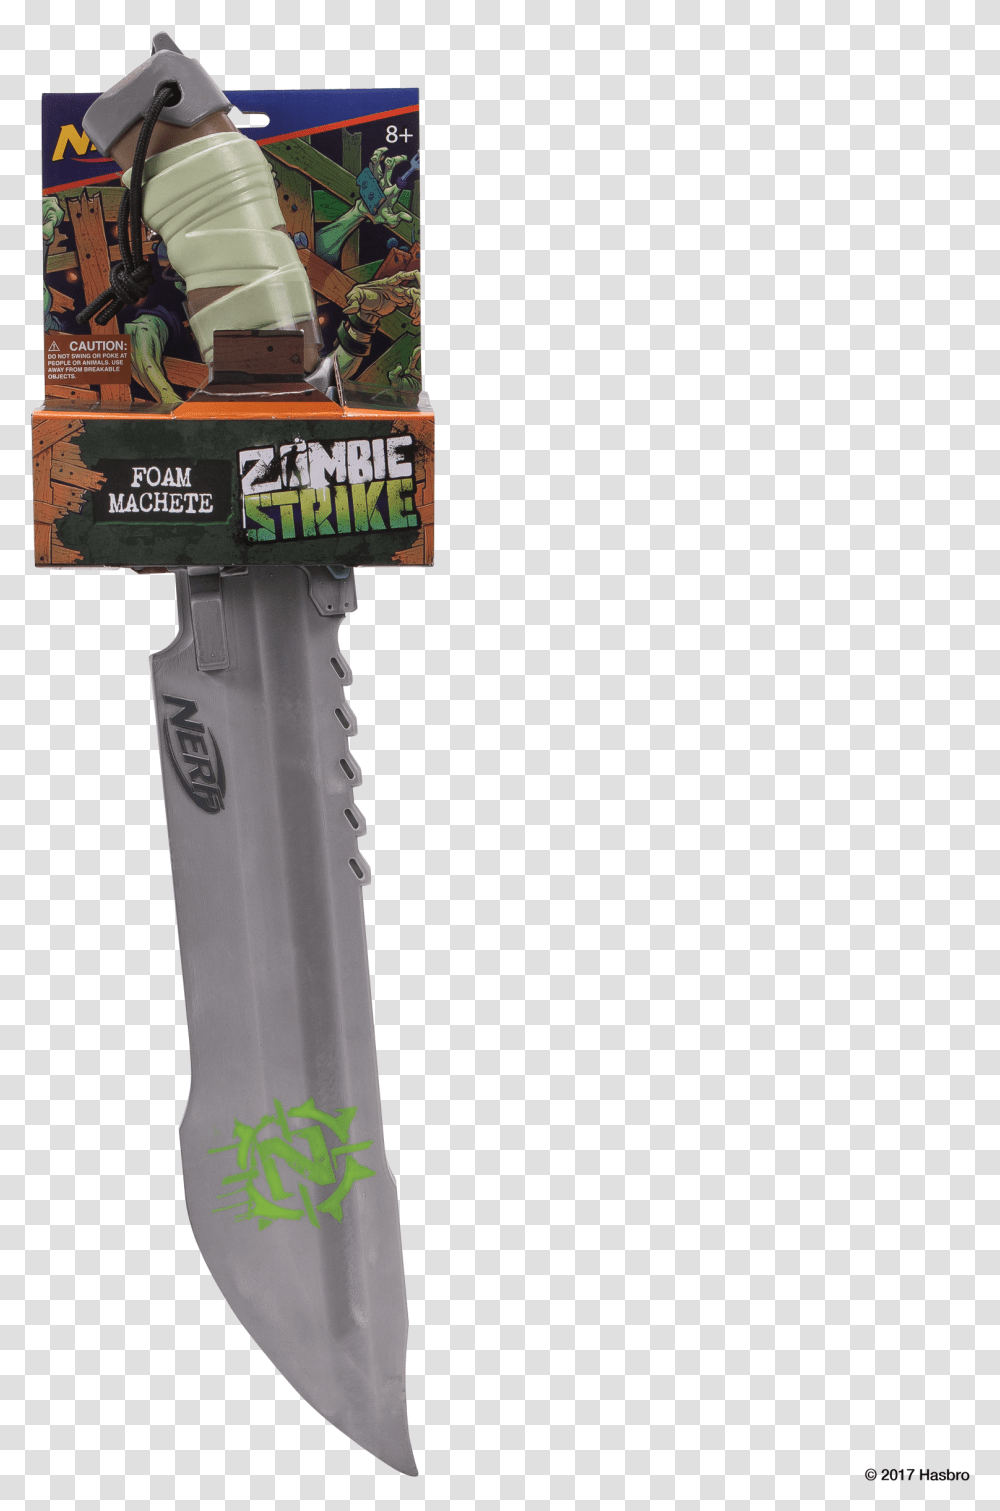 Nerf Zombie Strike Knives, Architecture, Building, Tool, Kiosk Transparent Png